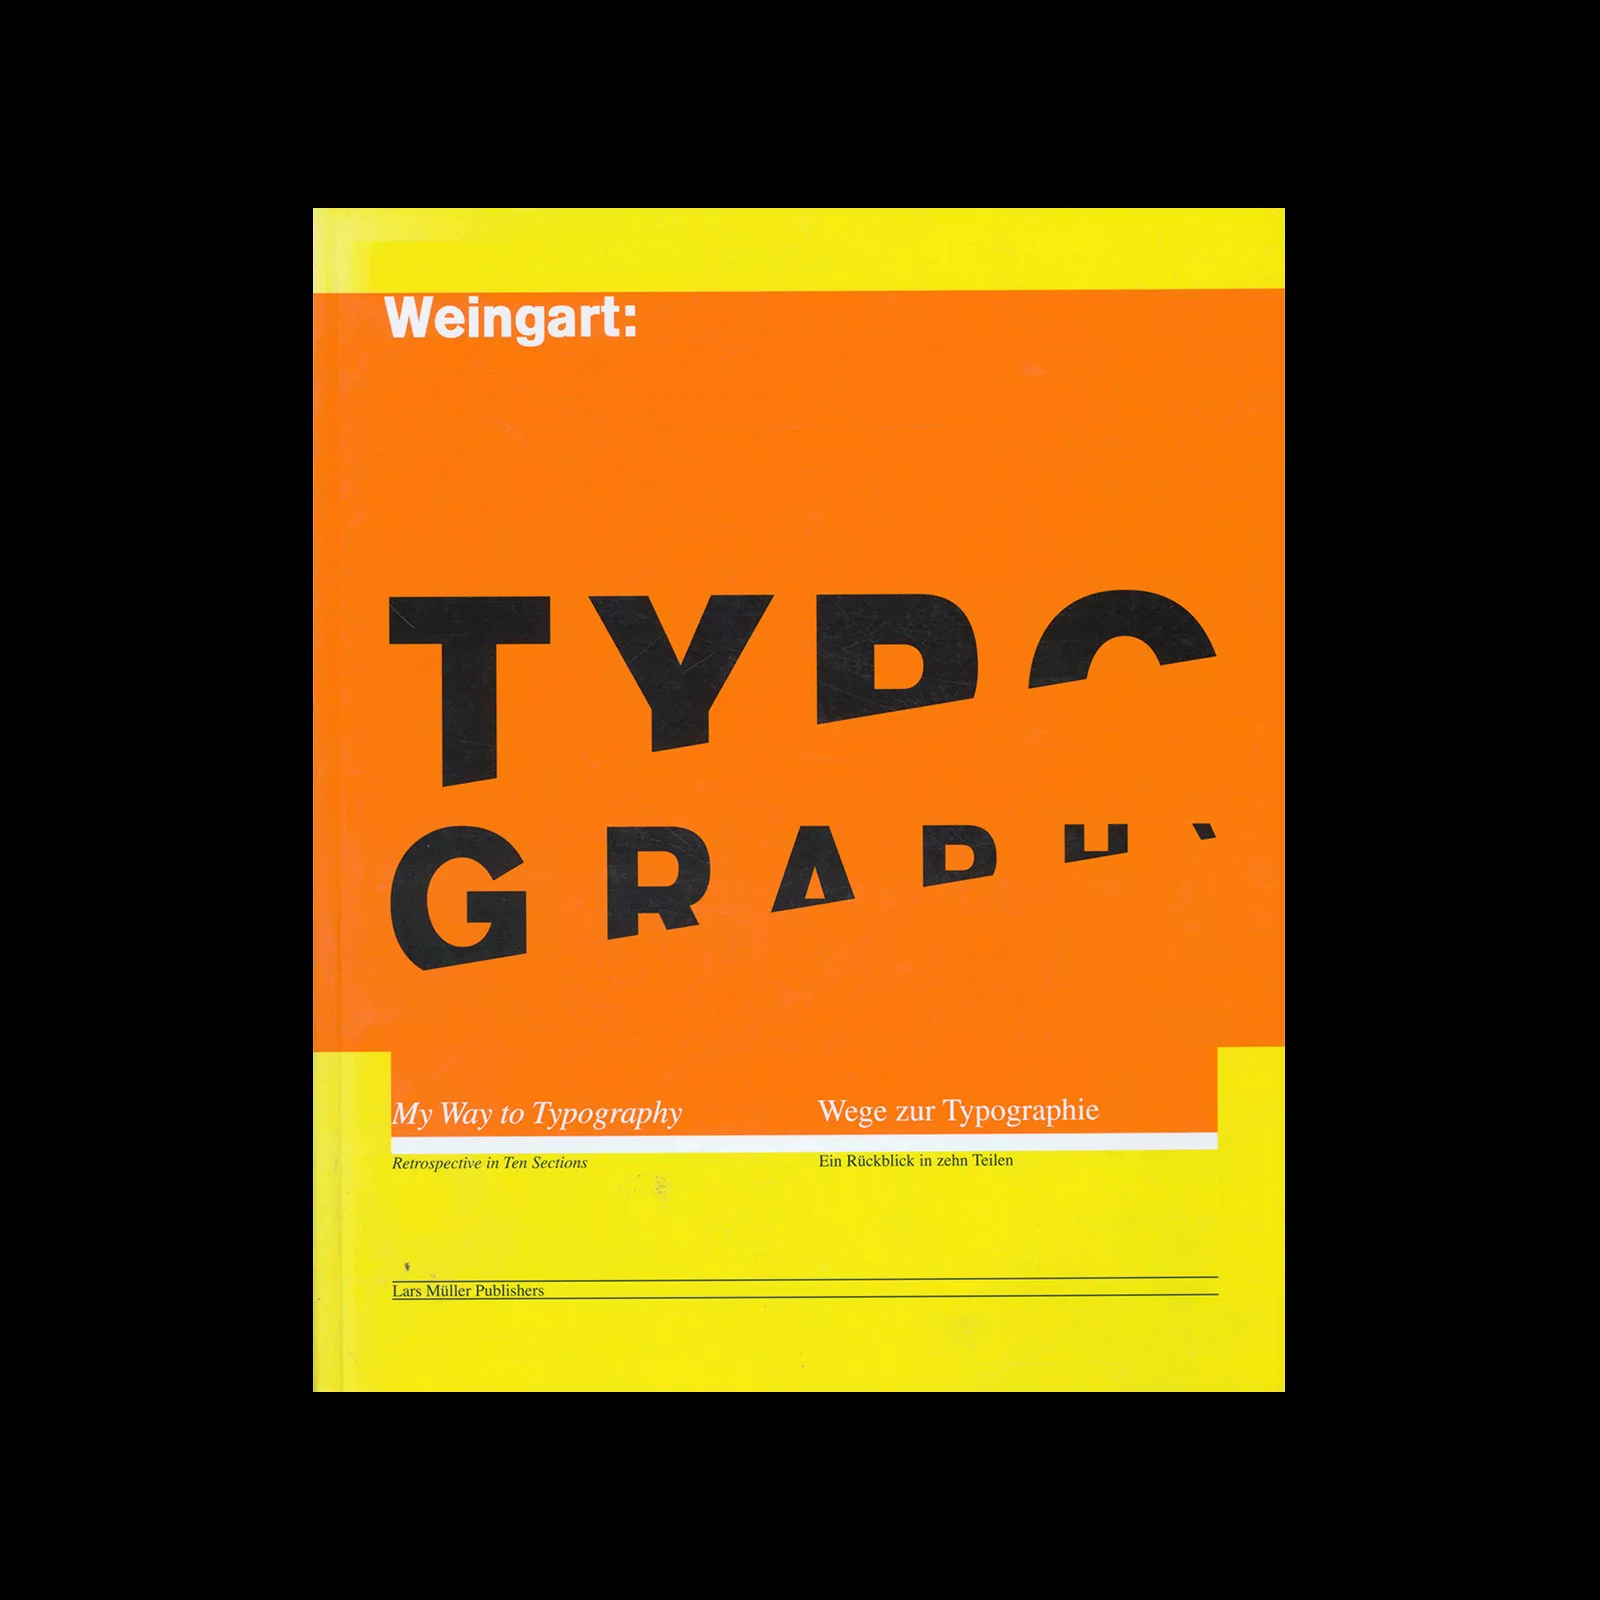 Weingart, Typography - My Way to Typography, Lars Muller Publishers, 2014